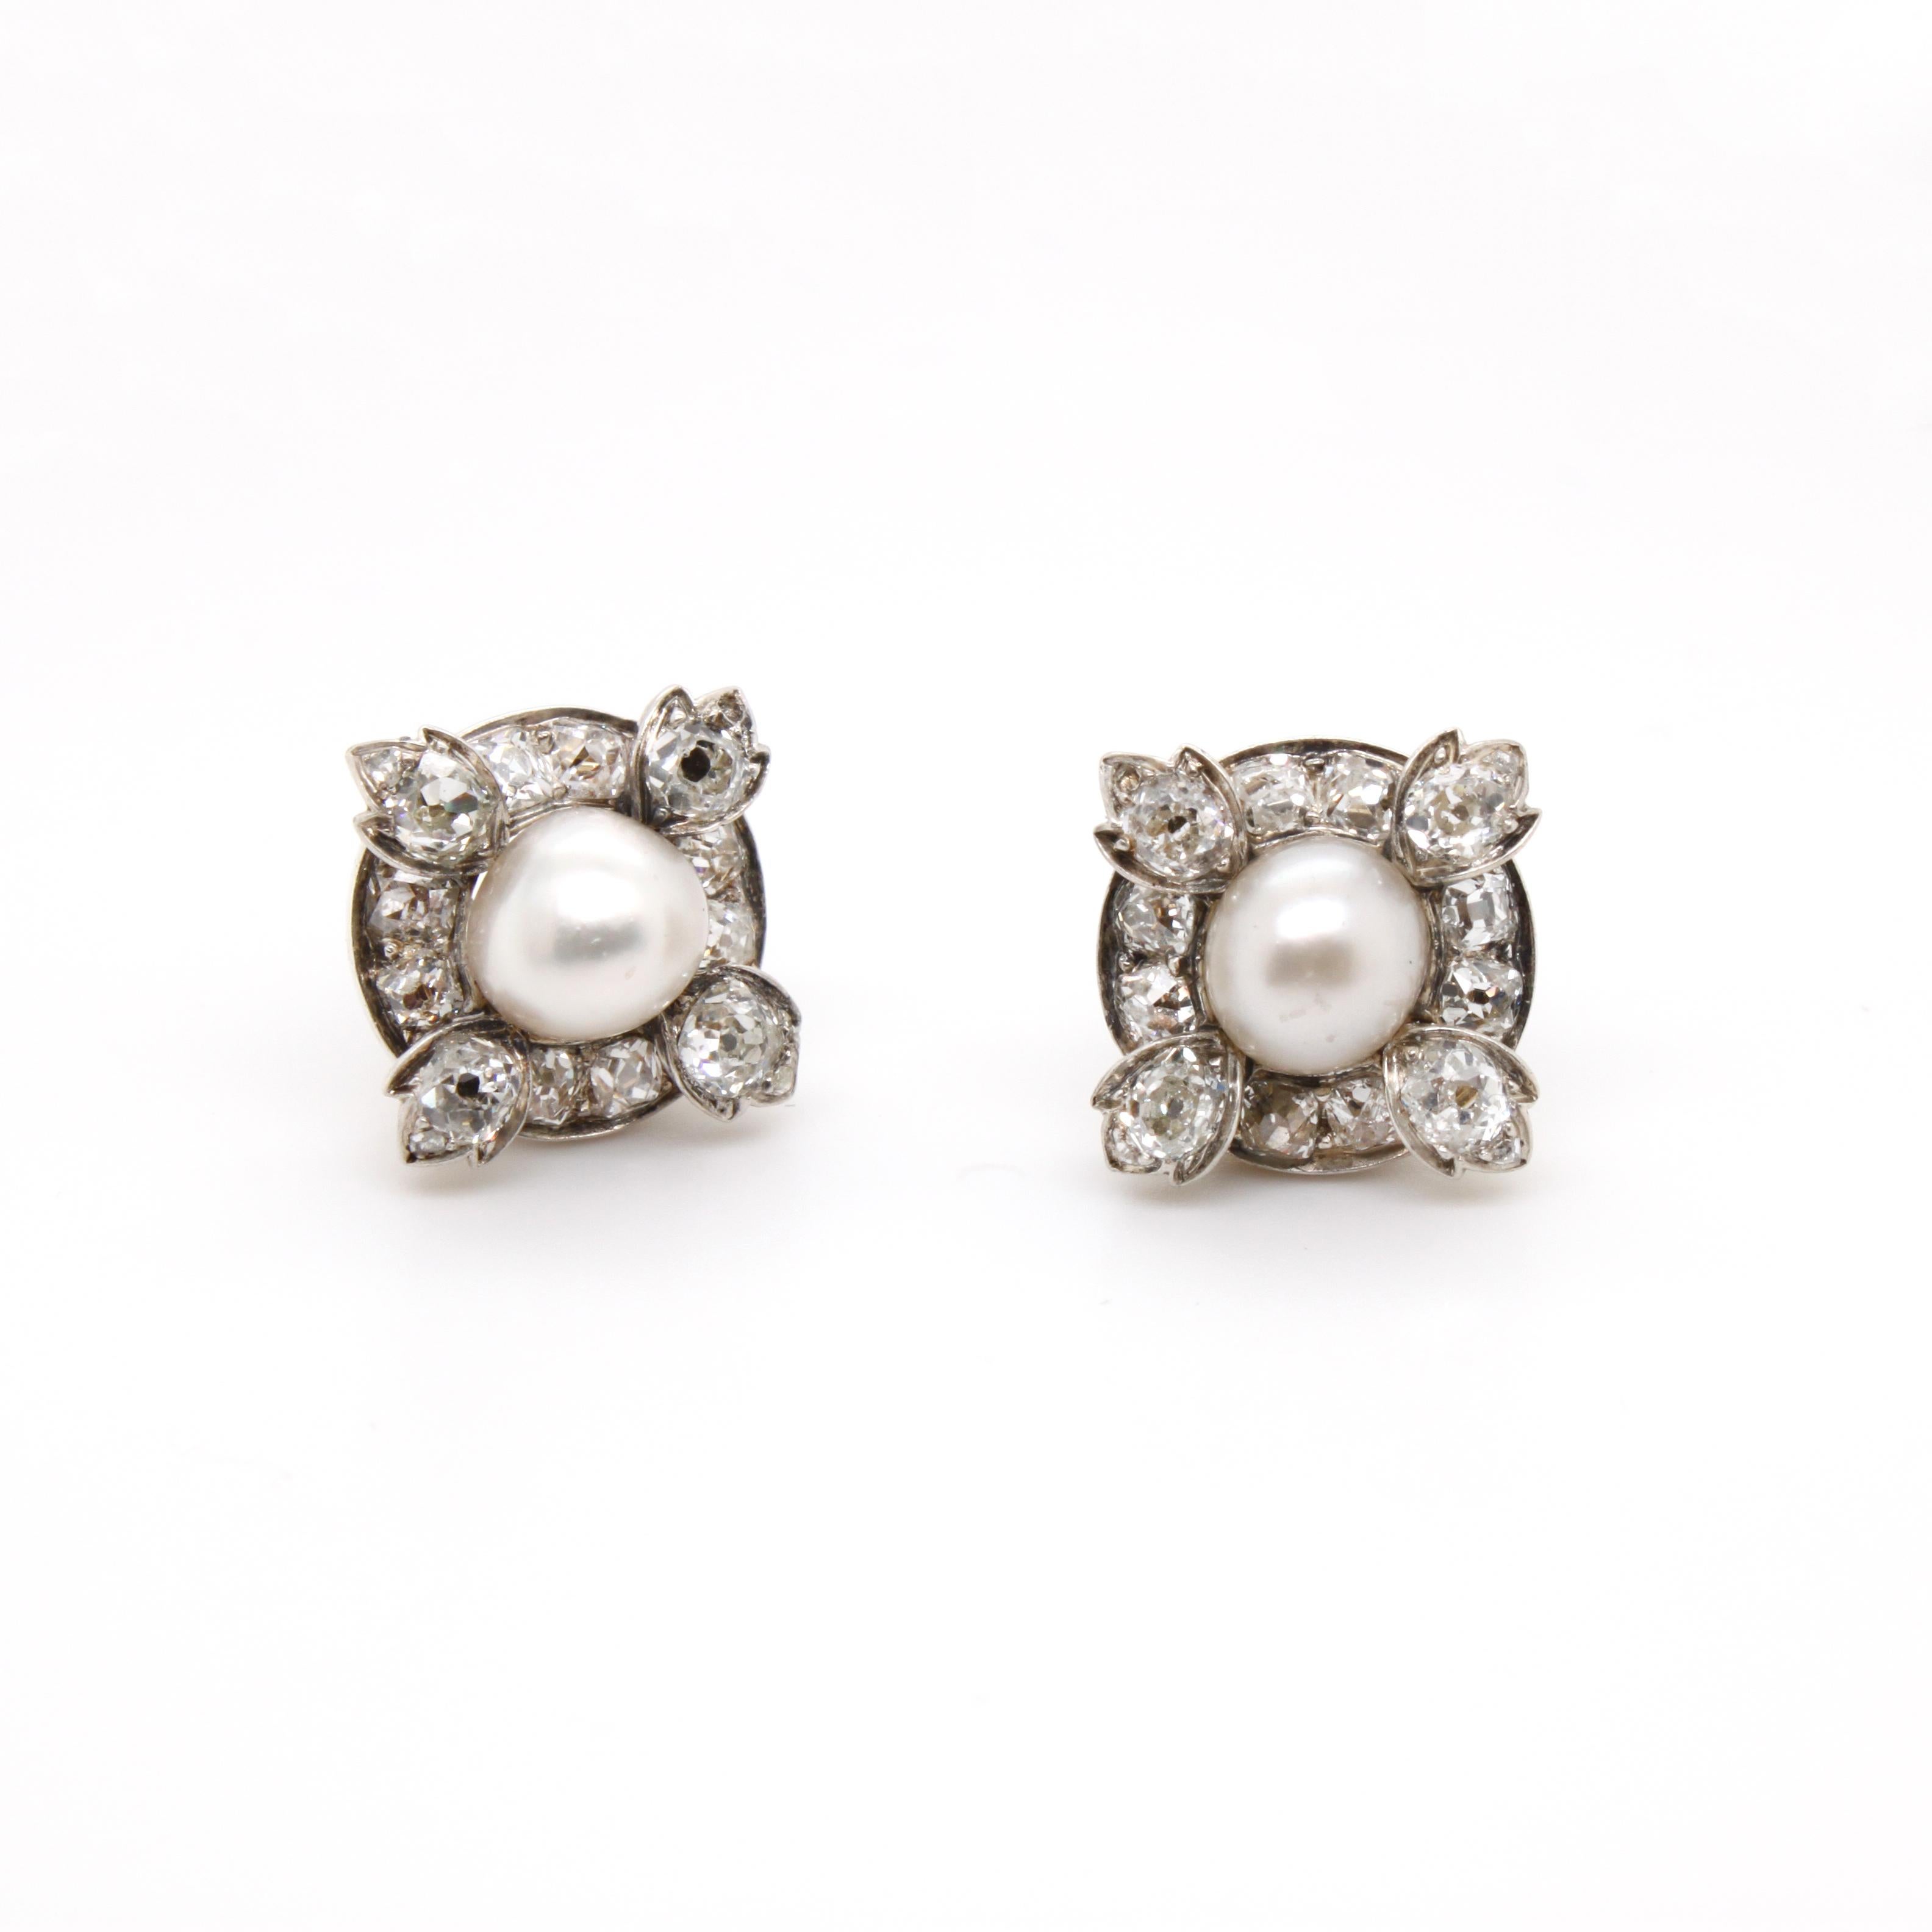 Victorian Natural Pearl and Diamond Cluster Earrings, ca. 1880s  

A beautiful pair of natural pearl and diamond cluster earrings, each with a natural saltwater pearl bouton of 7mm (tested, GCS), surrounded by a floral cluster of ca. 2 carats